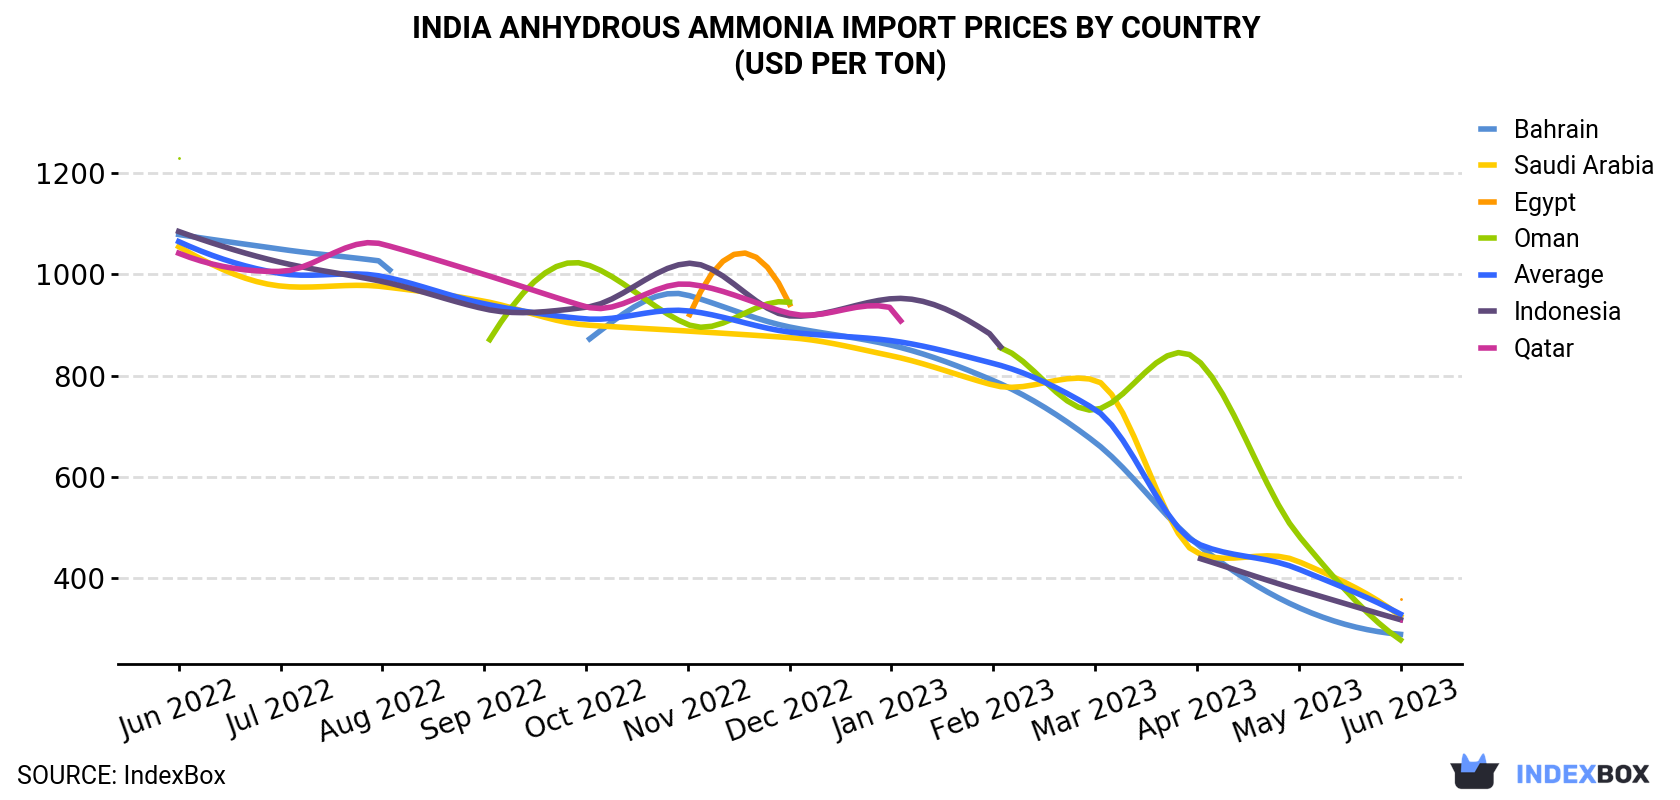 India Anhydrous Ammonia Import Prices By Country (USD Per Ton)